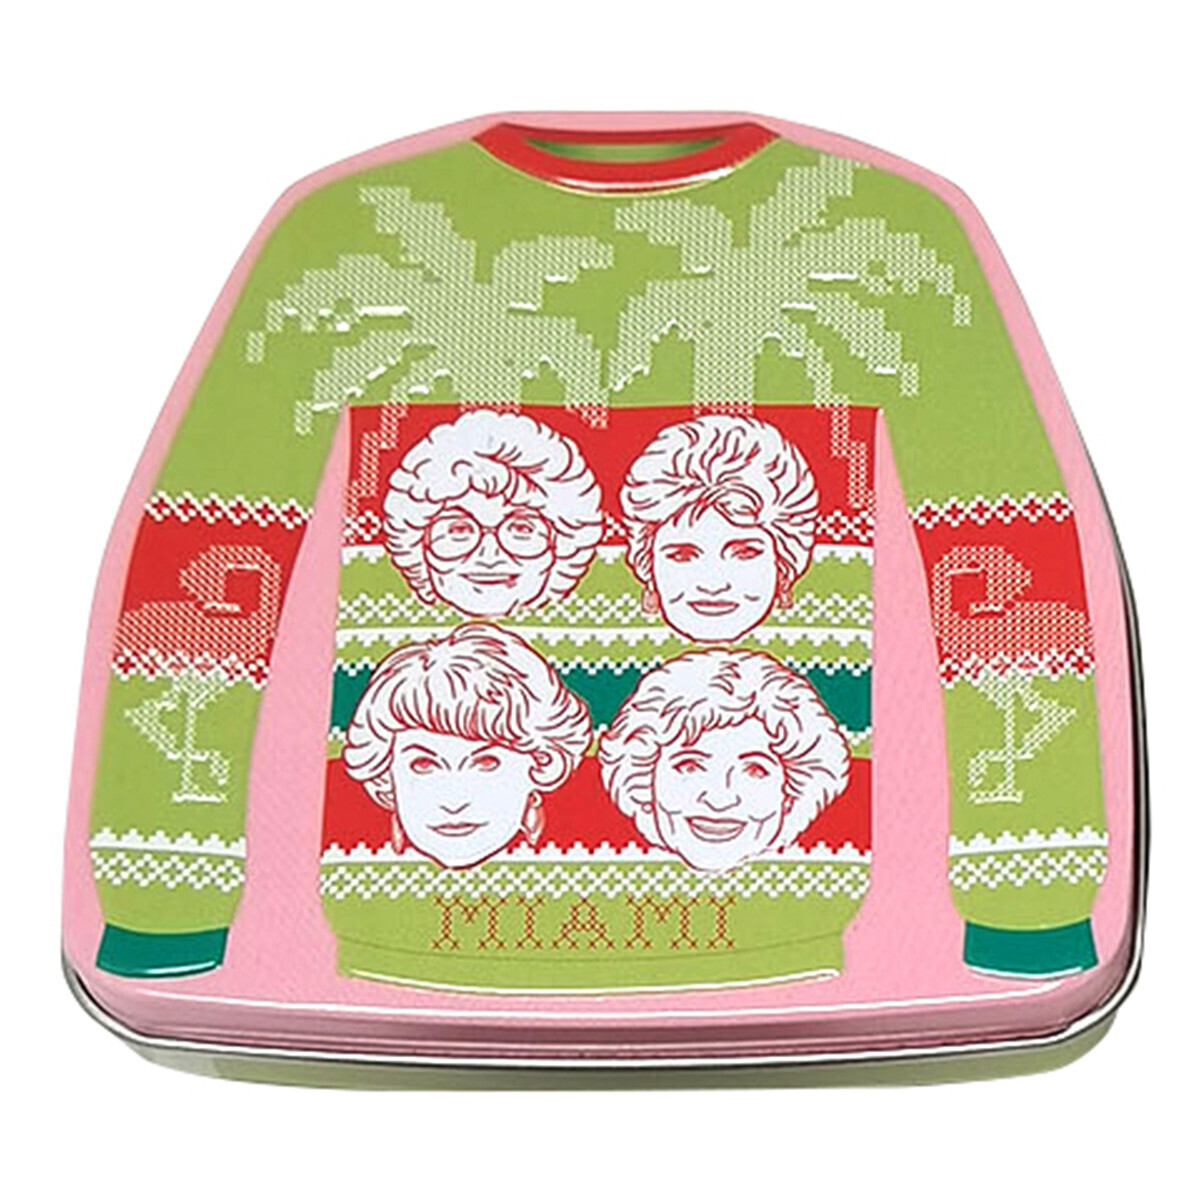 The Golden Girls Holiday Palm Sweater Tin